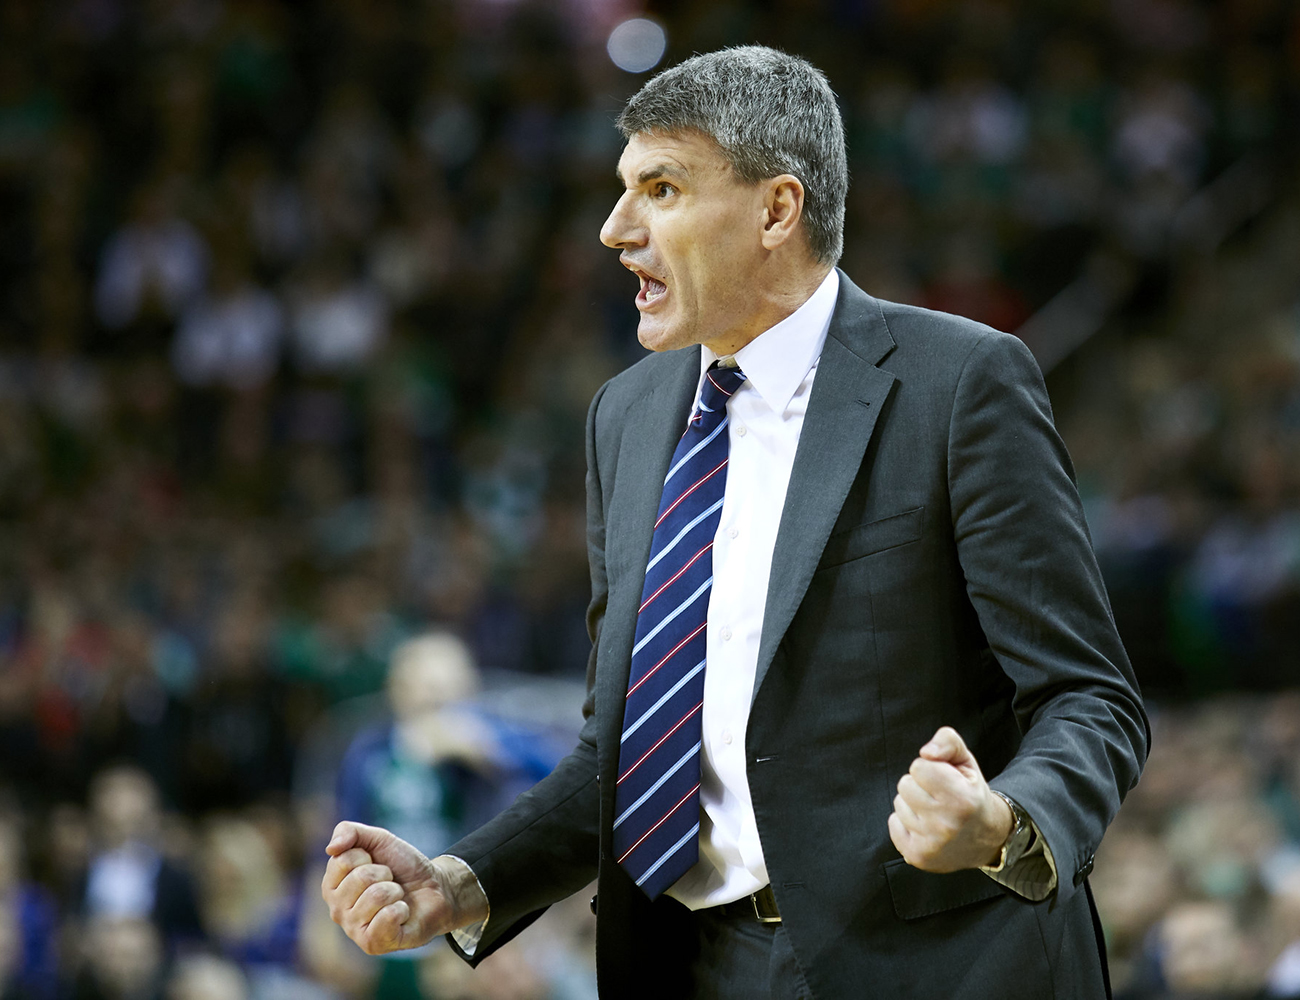 Velimir Perasovic is the new head coach of UNICS!